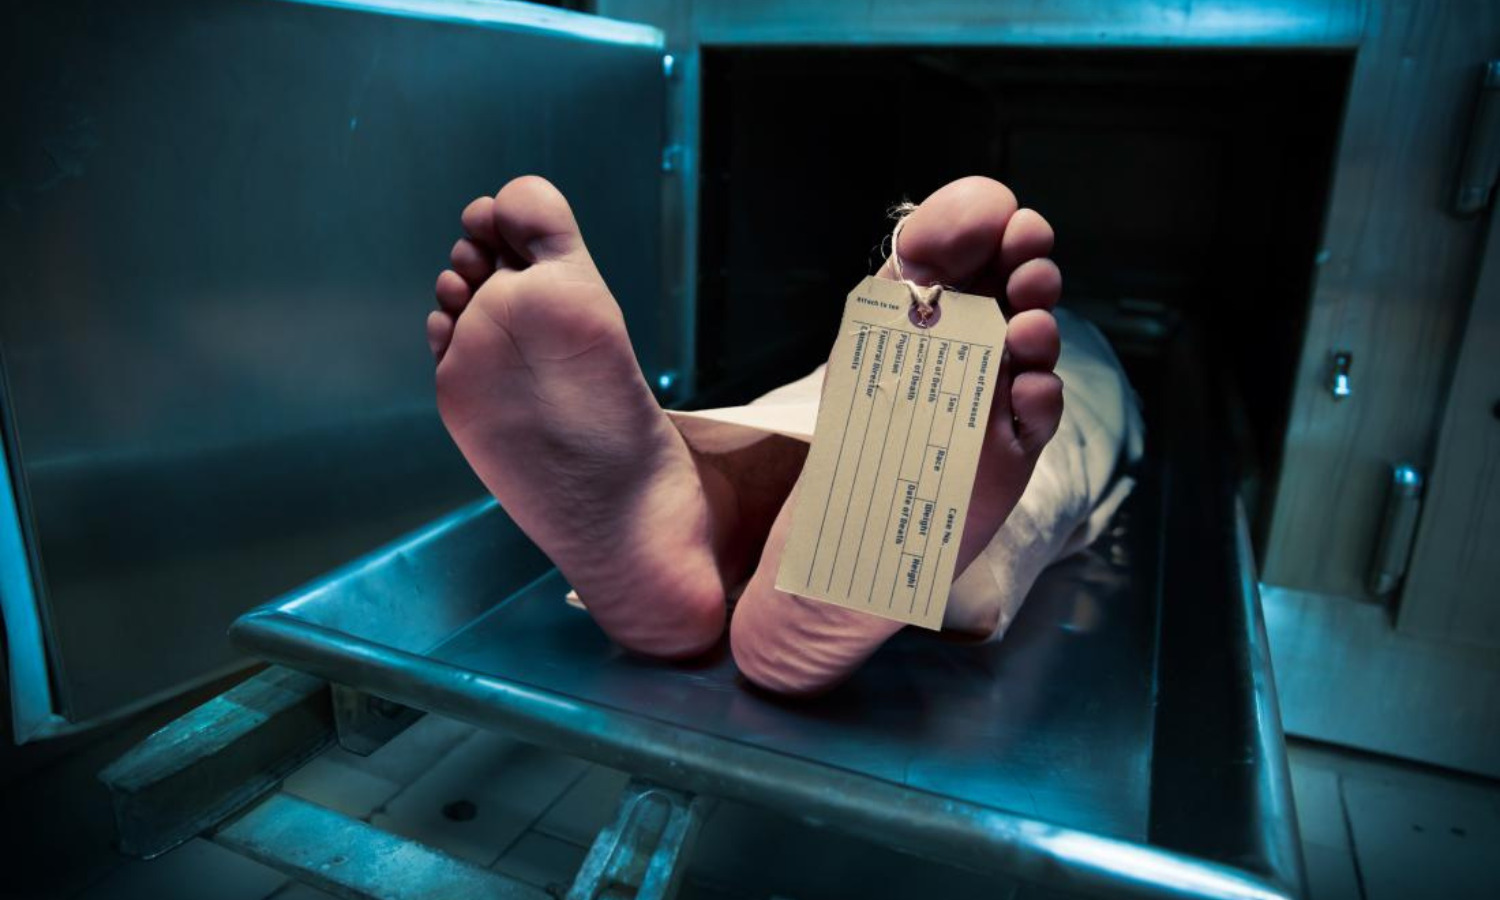 7 Creepy Things A Dead Body Can Do, According To Science